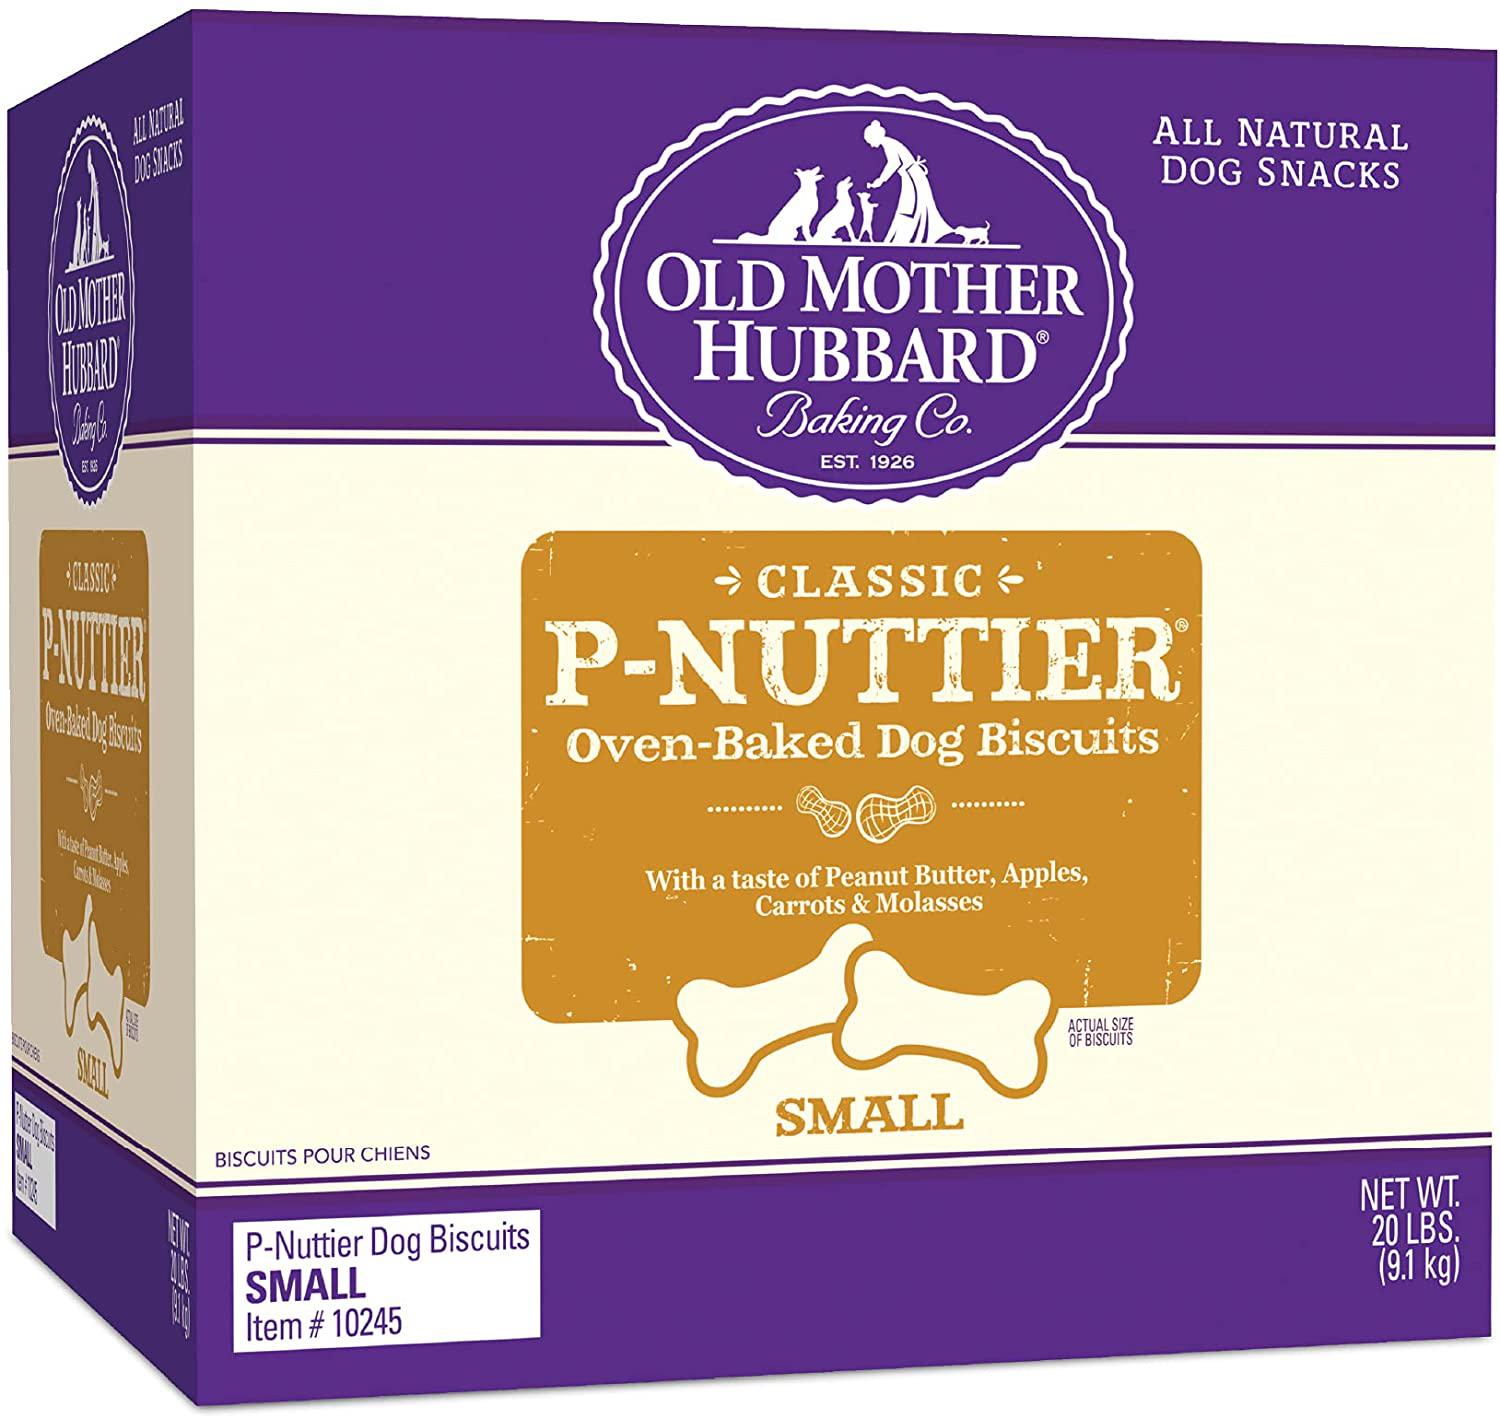 Old Mother Hubbard Classic P-Nuttier Peanut Butter Dog Treats, Oven Baked Crunchy Treats for Small Dogs, All Natural, Healthy, Small Training Treats Animals & Pet Supplies > Pet Supplies > Dog Supplies > Dog Treats Old Mother Hubbard 20 Pound Box (Pack of 1)  